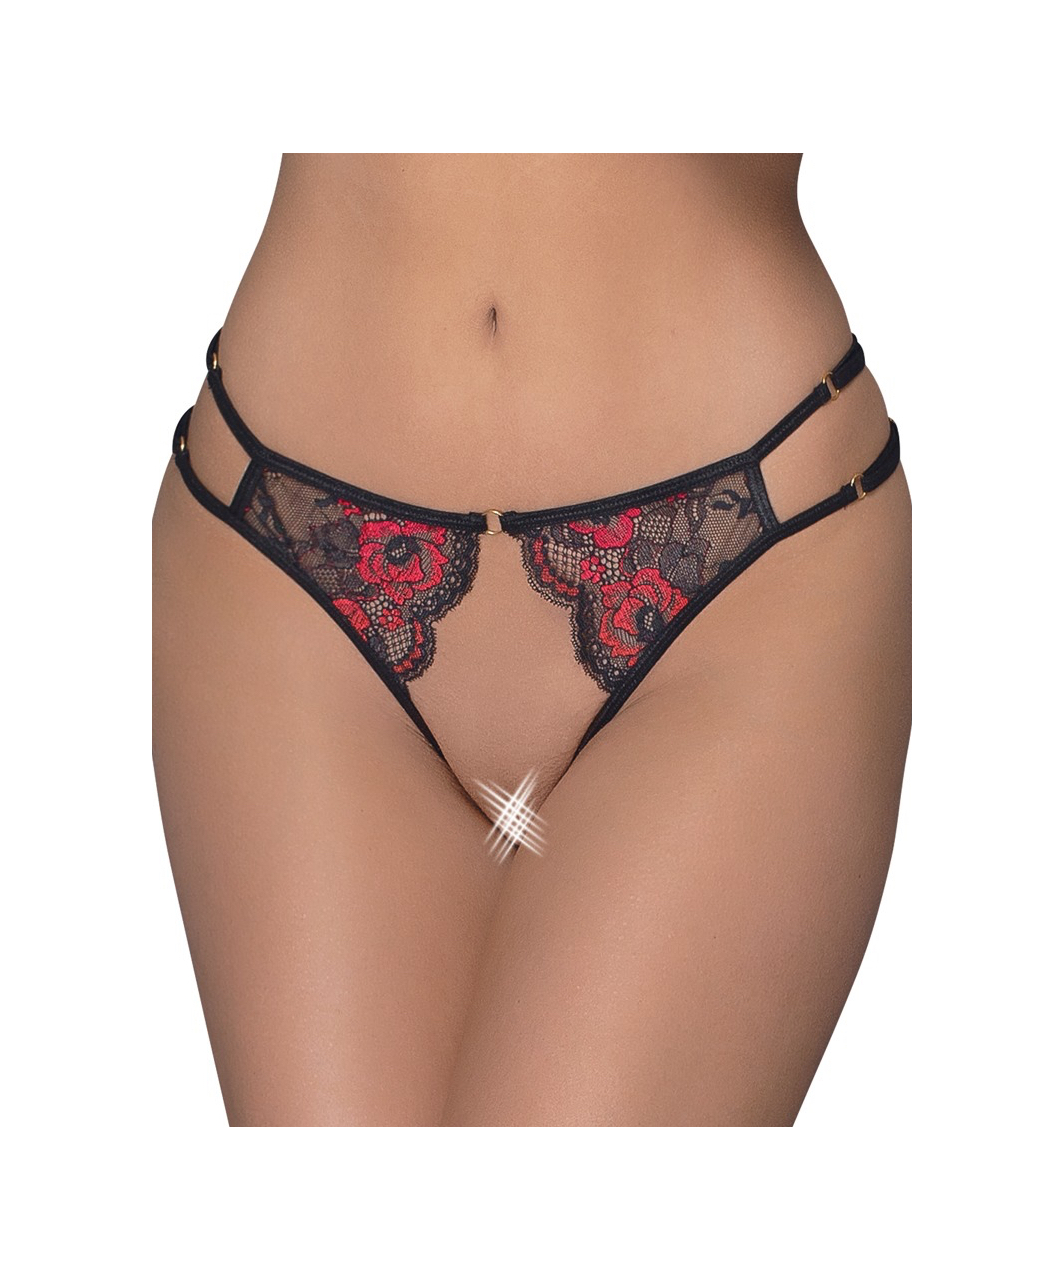 Cottelli Lingerie black lace crotchless string with red embroidery